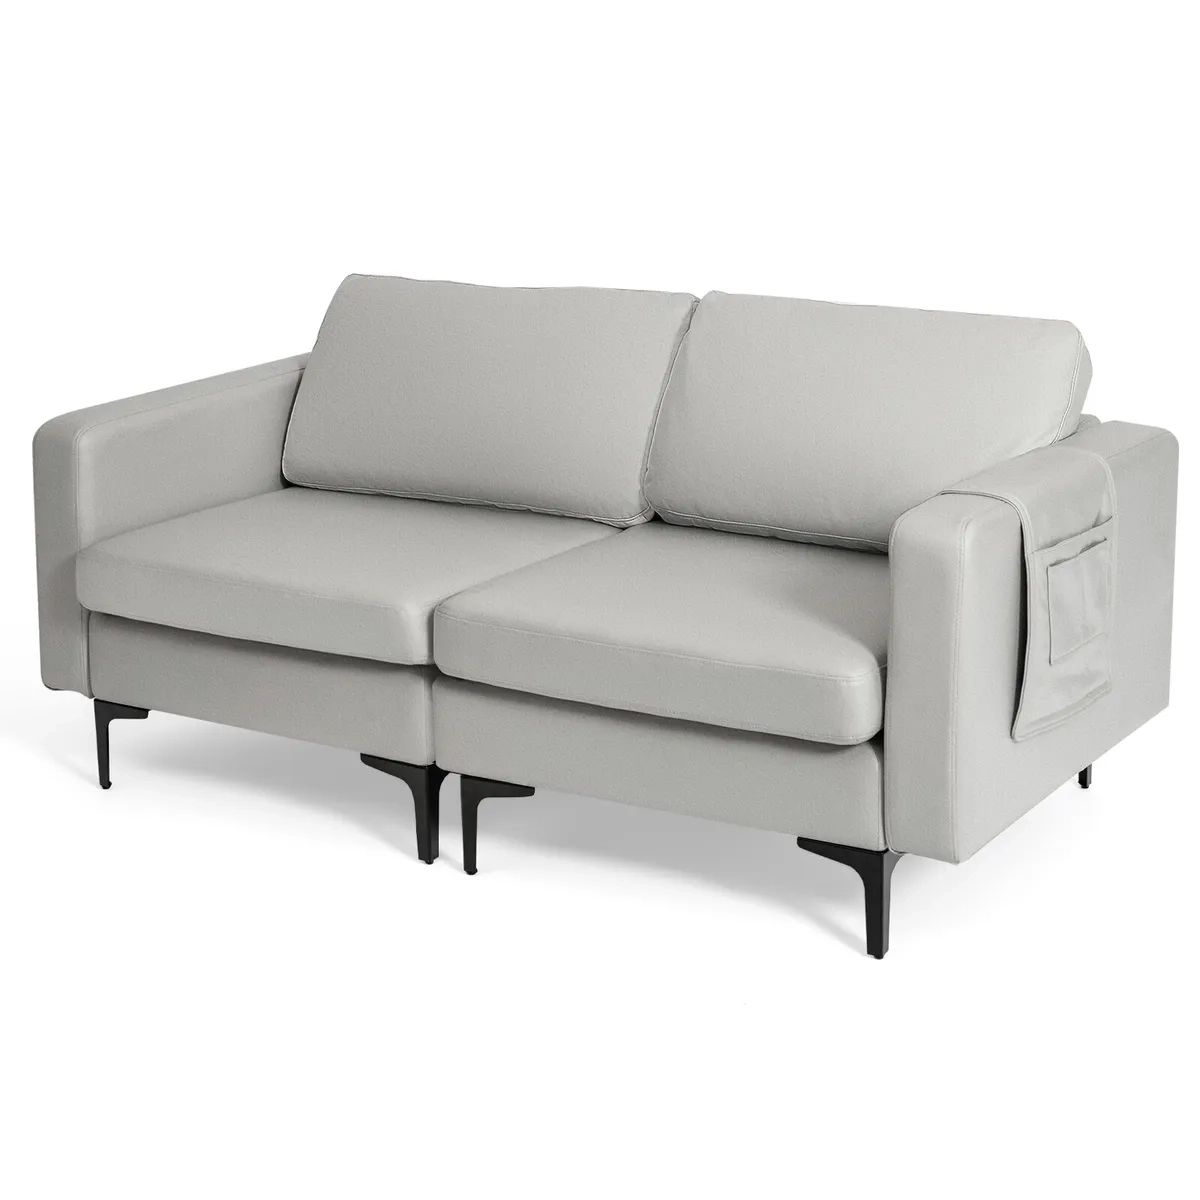 Loveseat Leathaire 2 Seat Sofa Couch Modern W/ Side Storage Pocket Light  Grey | Ebay Pertaining To Modern Light Grey Loveseat Sofas (View 10 of 15)